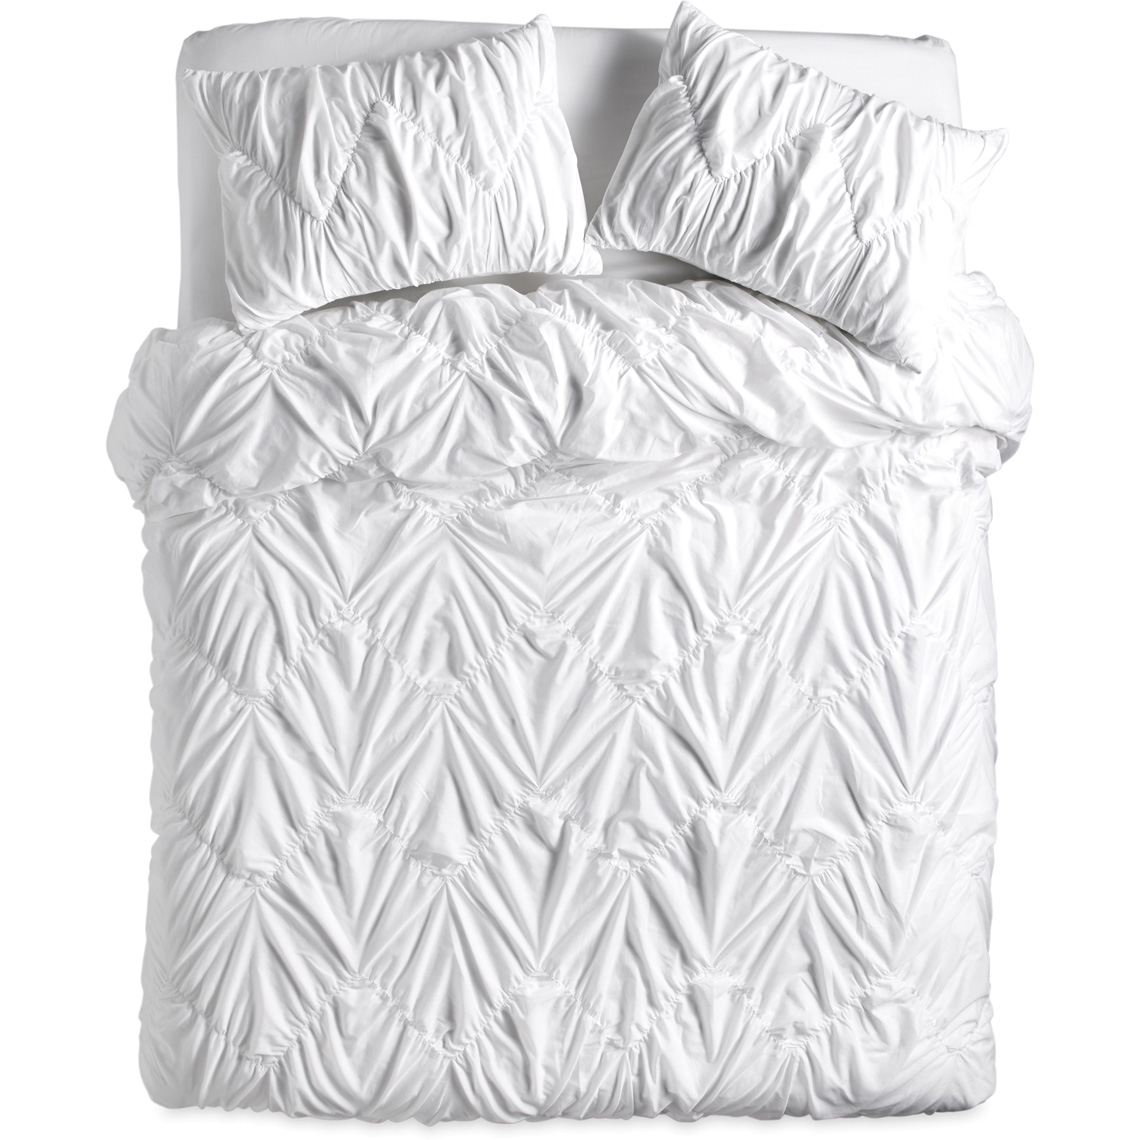 The Pioneer Woman Queen Duvet Cover 18 On Walmart Com The